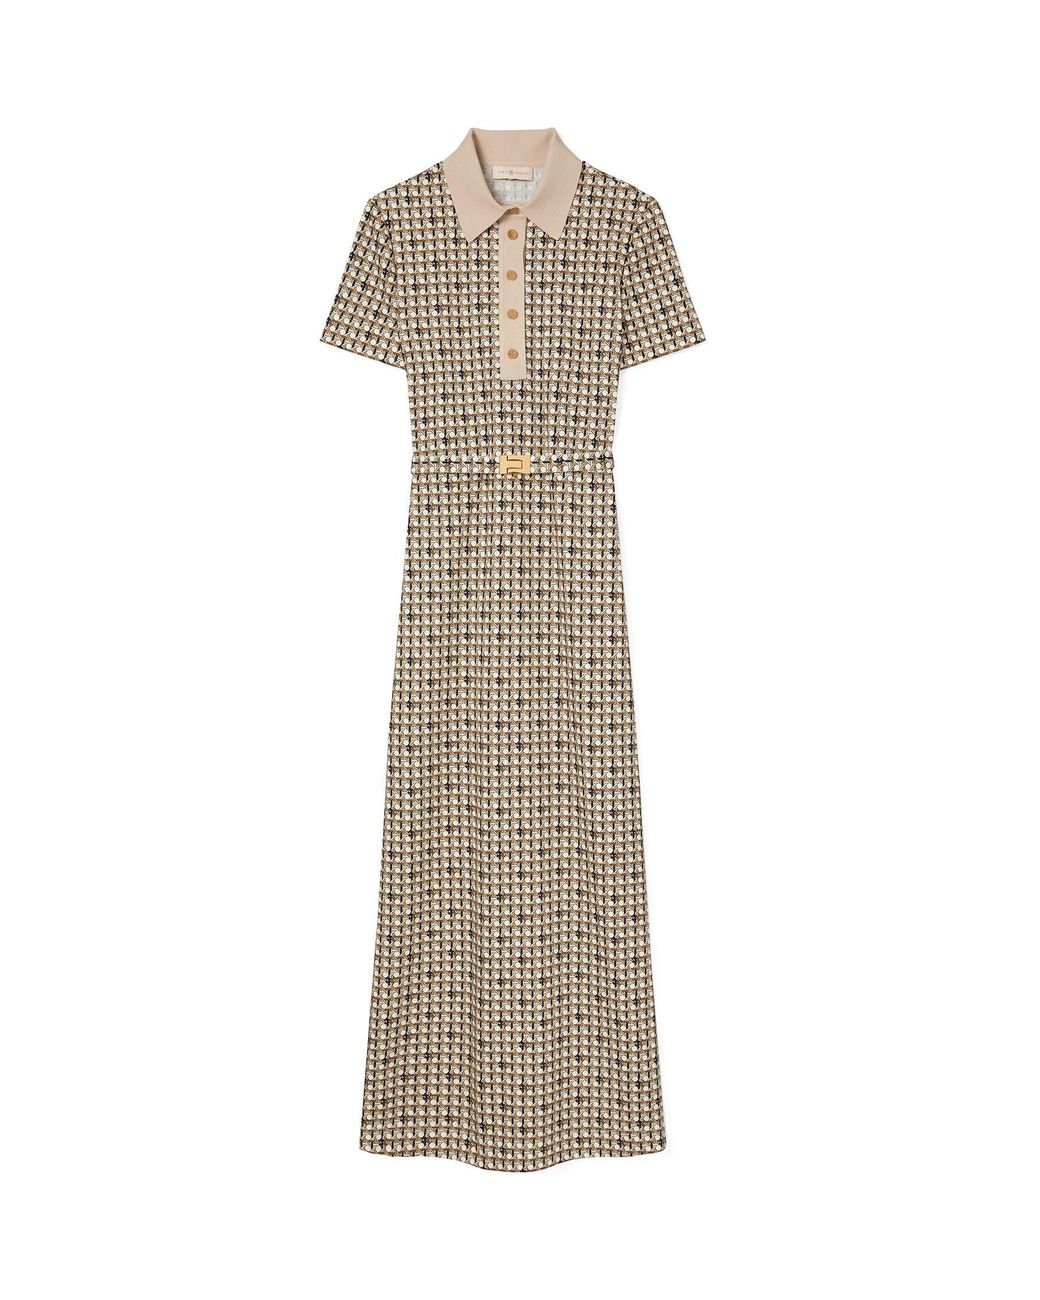 Tory Burch Printed Knit Poplin Polo Dress in Natural | Lyst